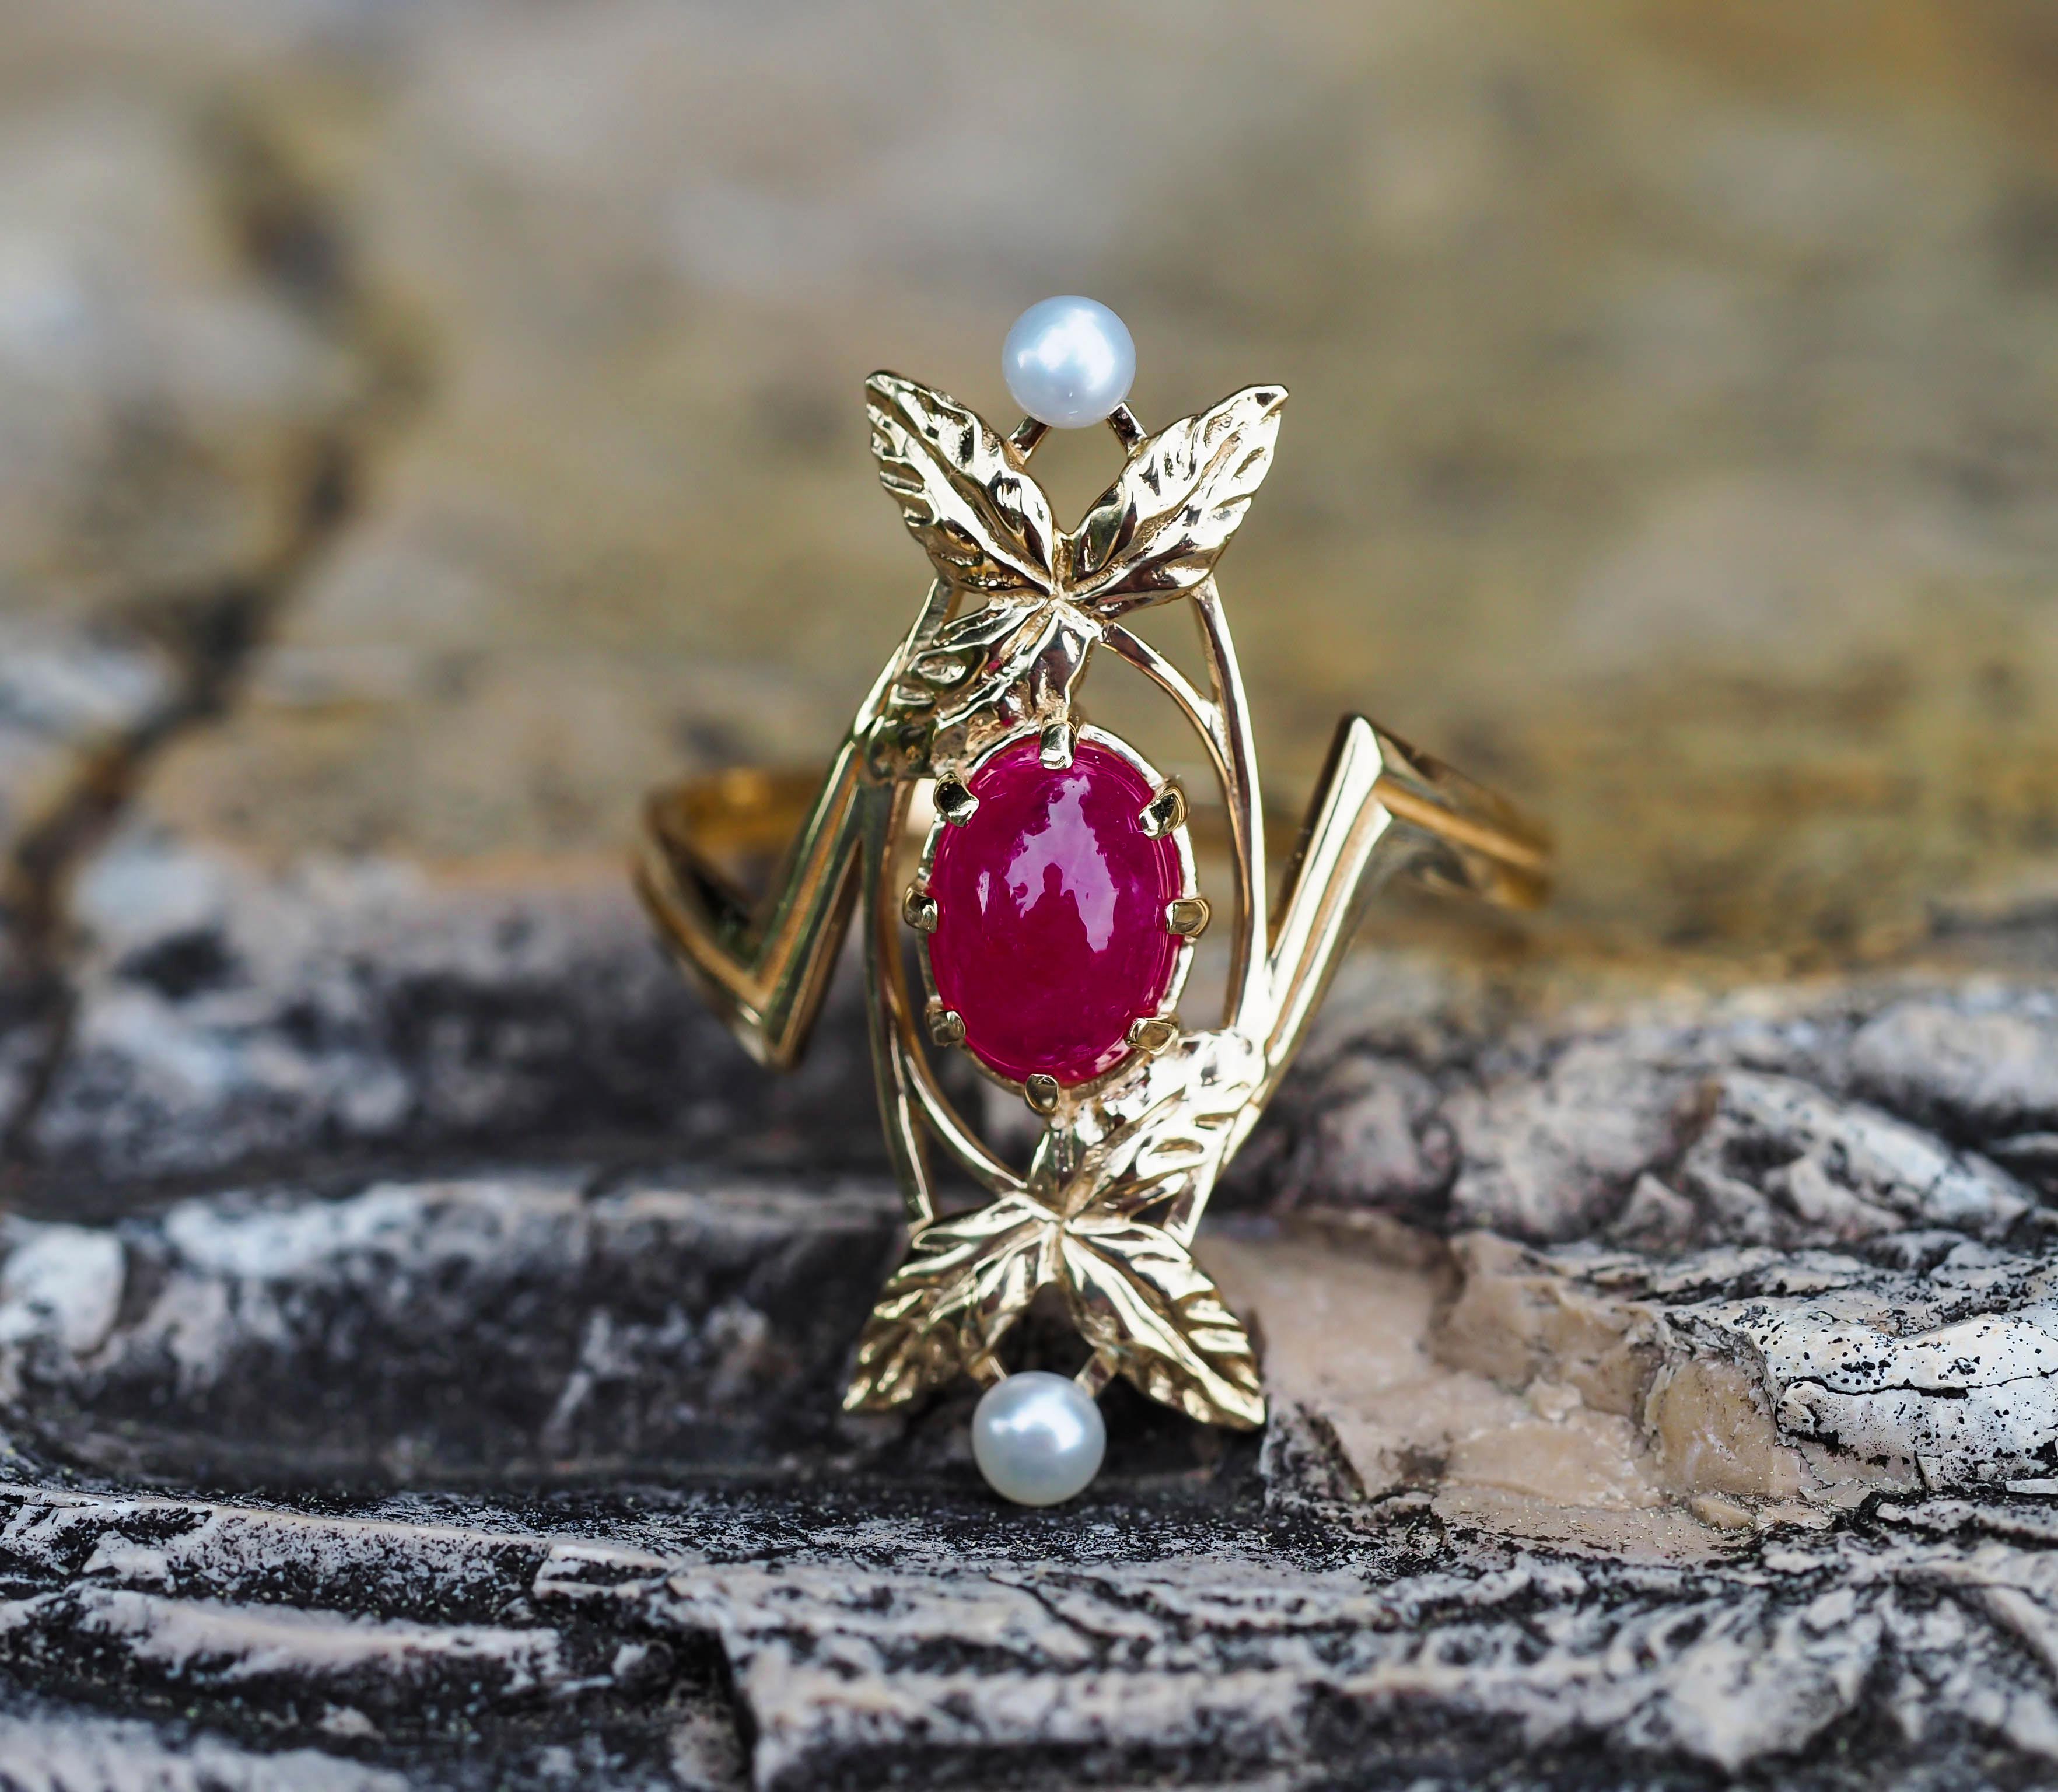 14k Gold Ring with Ruby and Pearls, Vintage Style Ring with Ruby 3